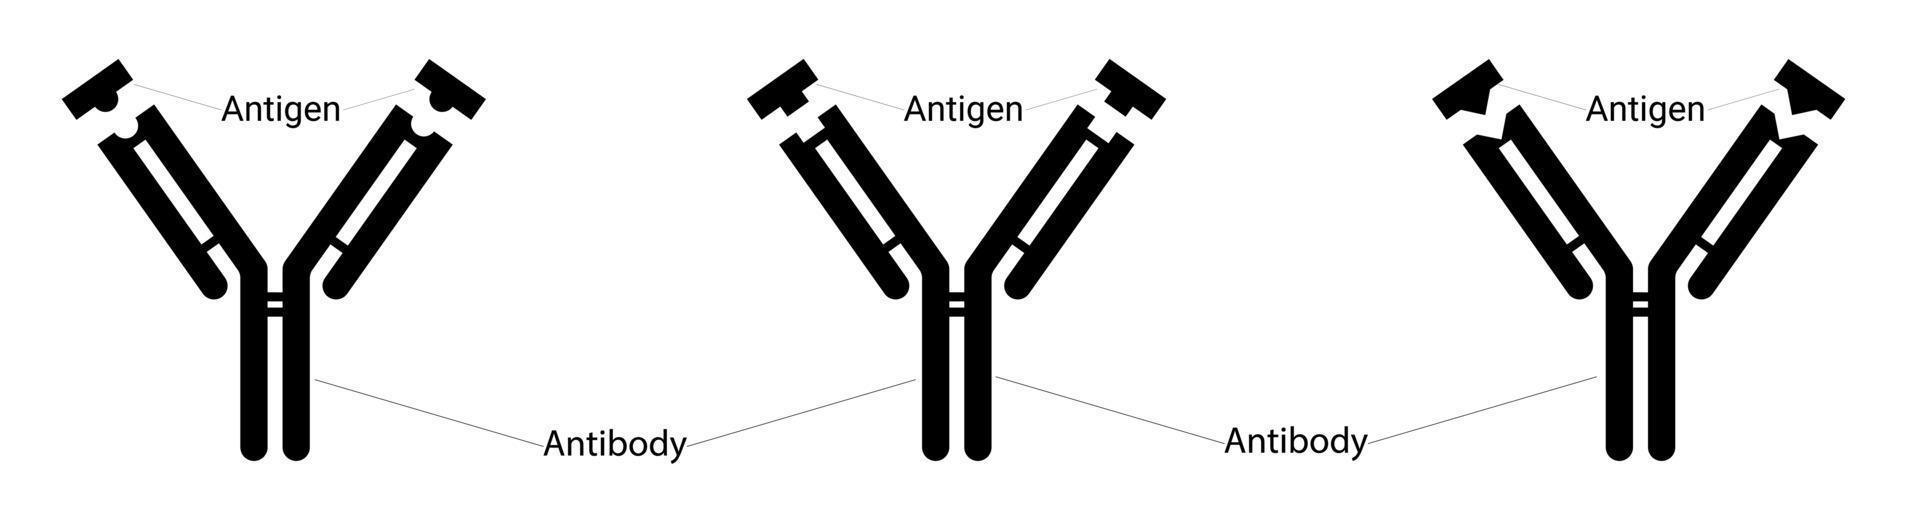 Different types of antigens and different types of antibodies. Human immunity. Fighting viruses. Epitope and paratope. Flat. Vector illustration.